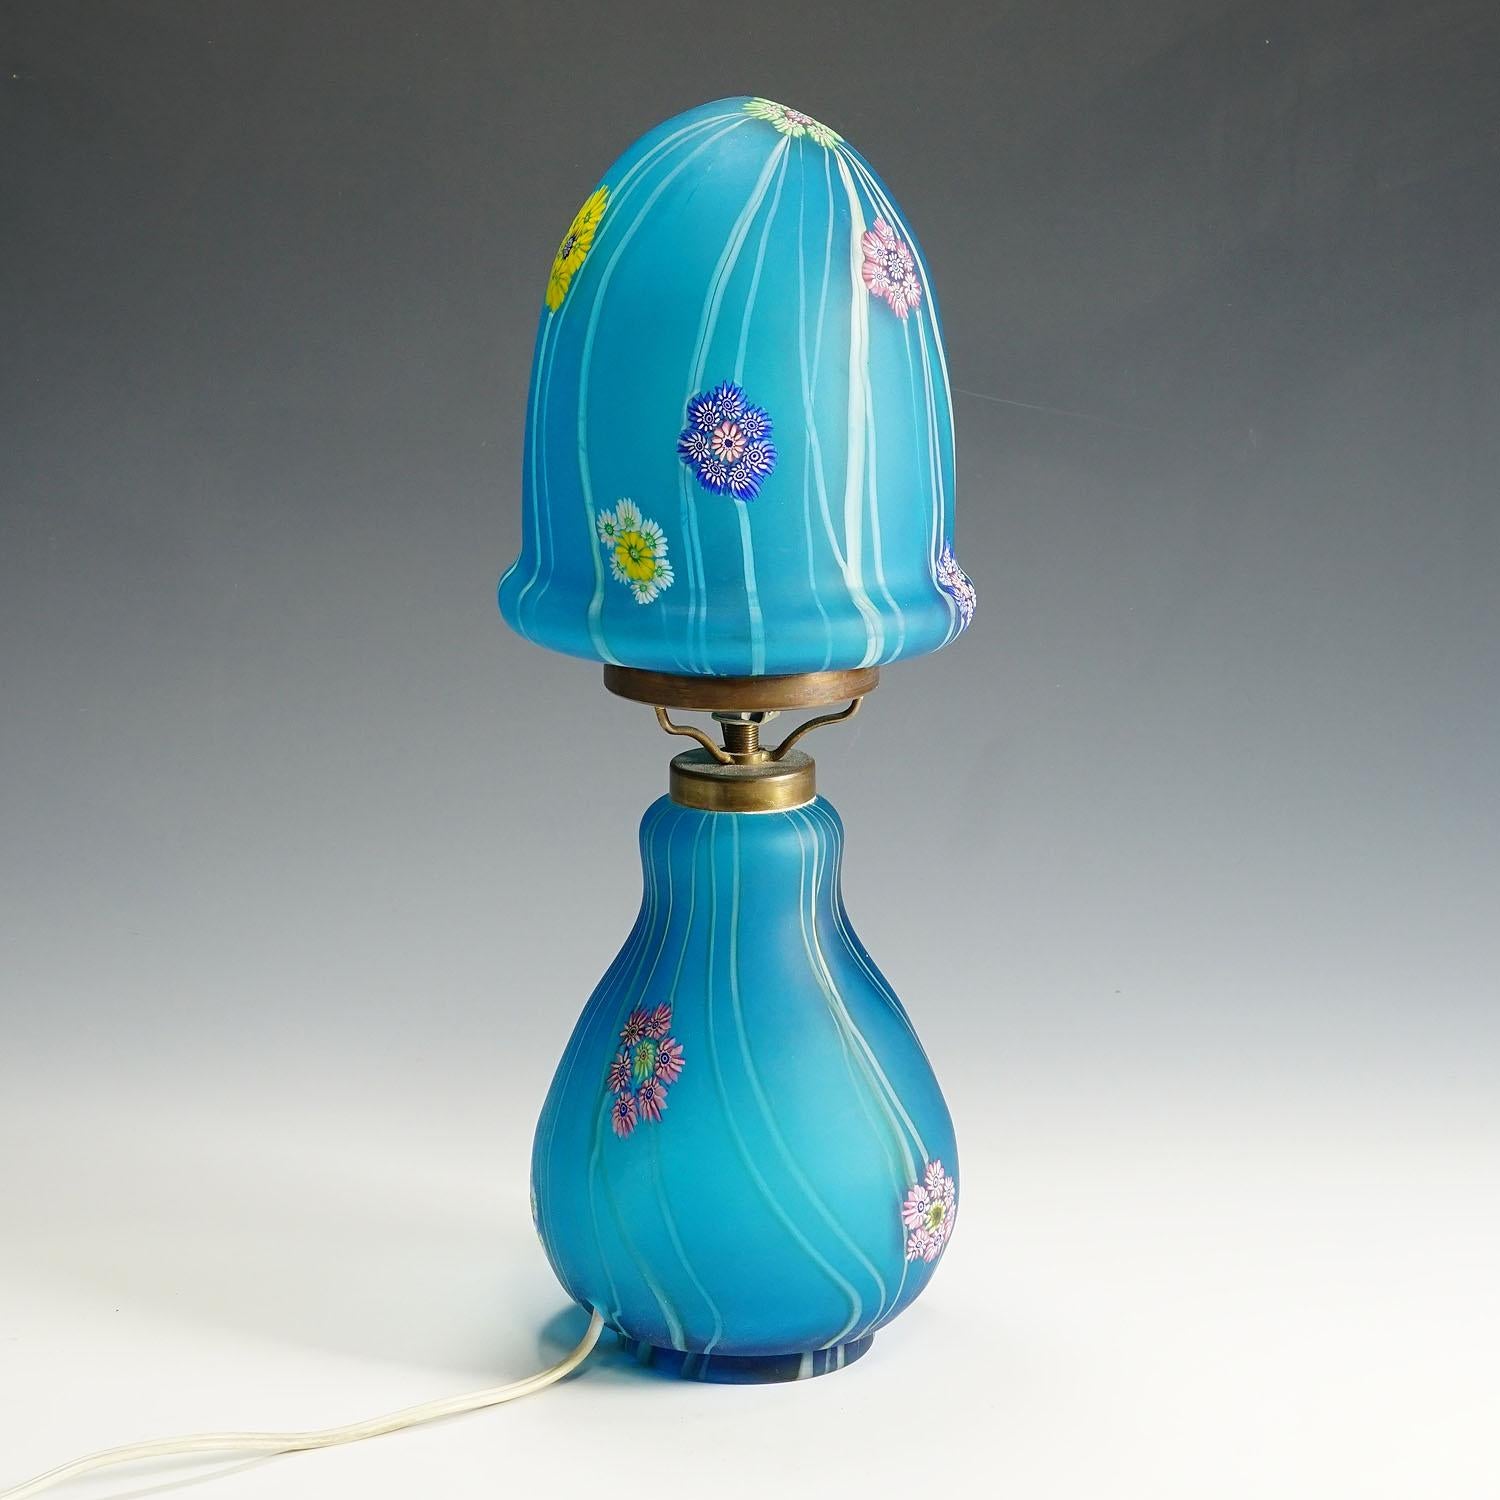 Vintage Fratelli Toso Millefiori Desk Lamp, Murano circa 1950

A rare millefiori murrine glass desk lamp manufactured by Vetreria Fratelli Toso, Murano around 1950. Made of blue glass with melted white and green glass threads and polycrome murrines.